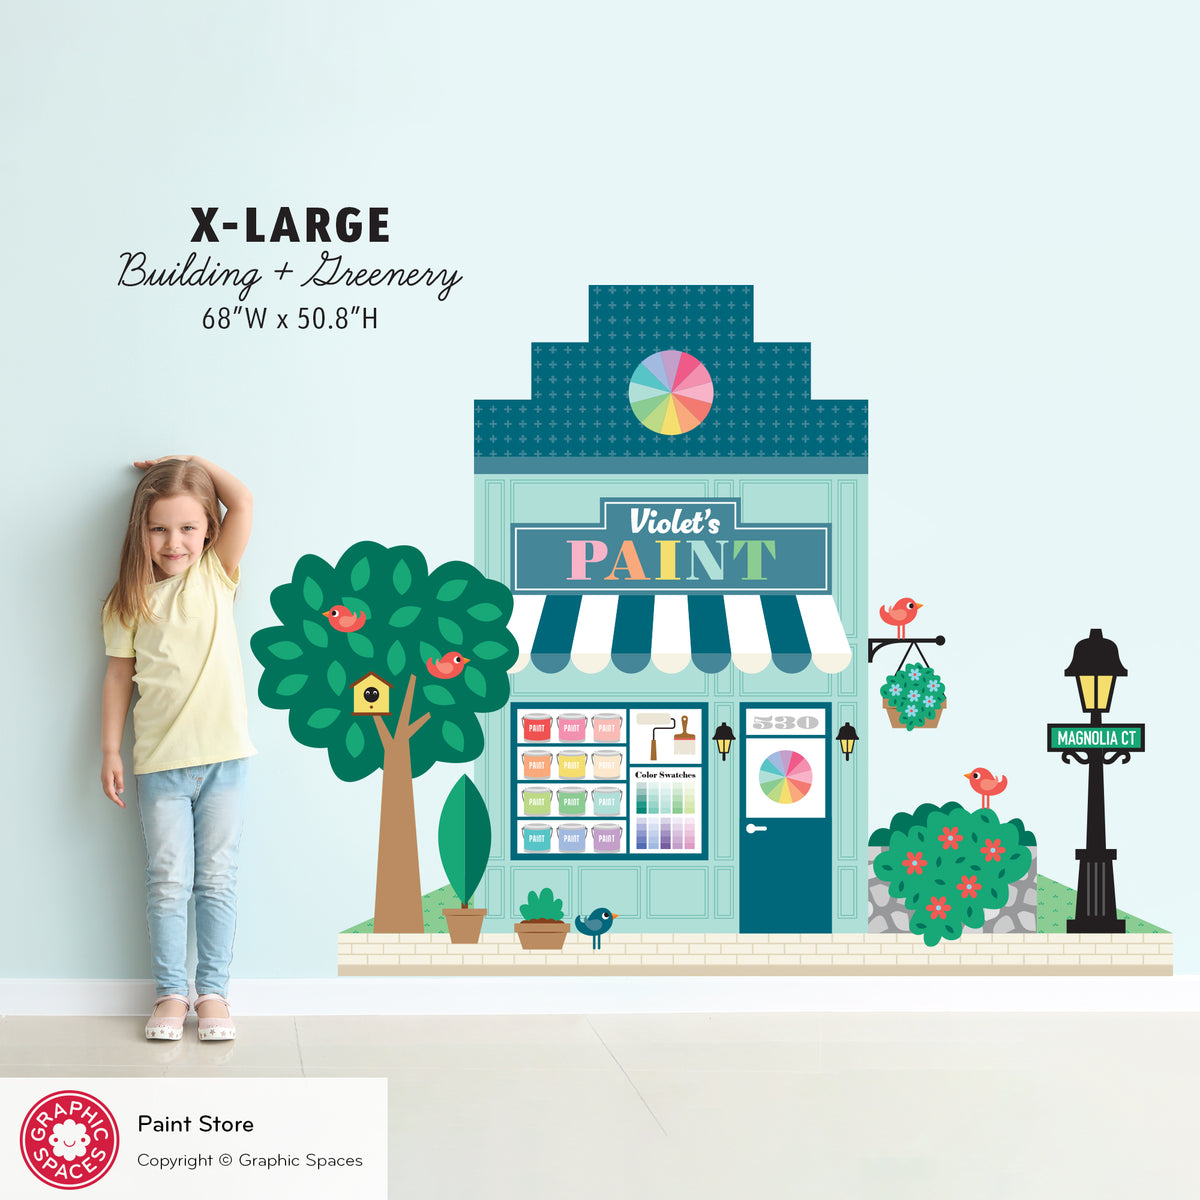 Paint Store Fabric Wall Decal - Happy Town